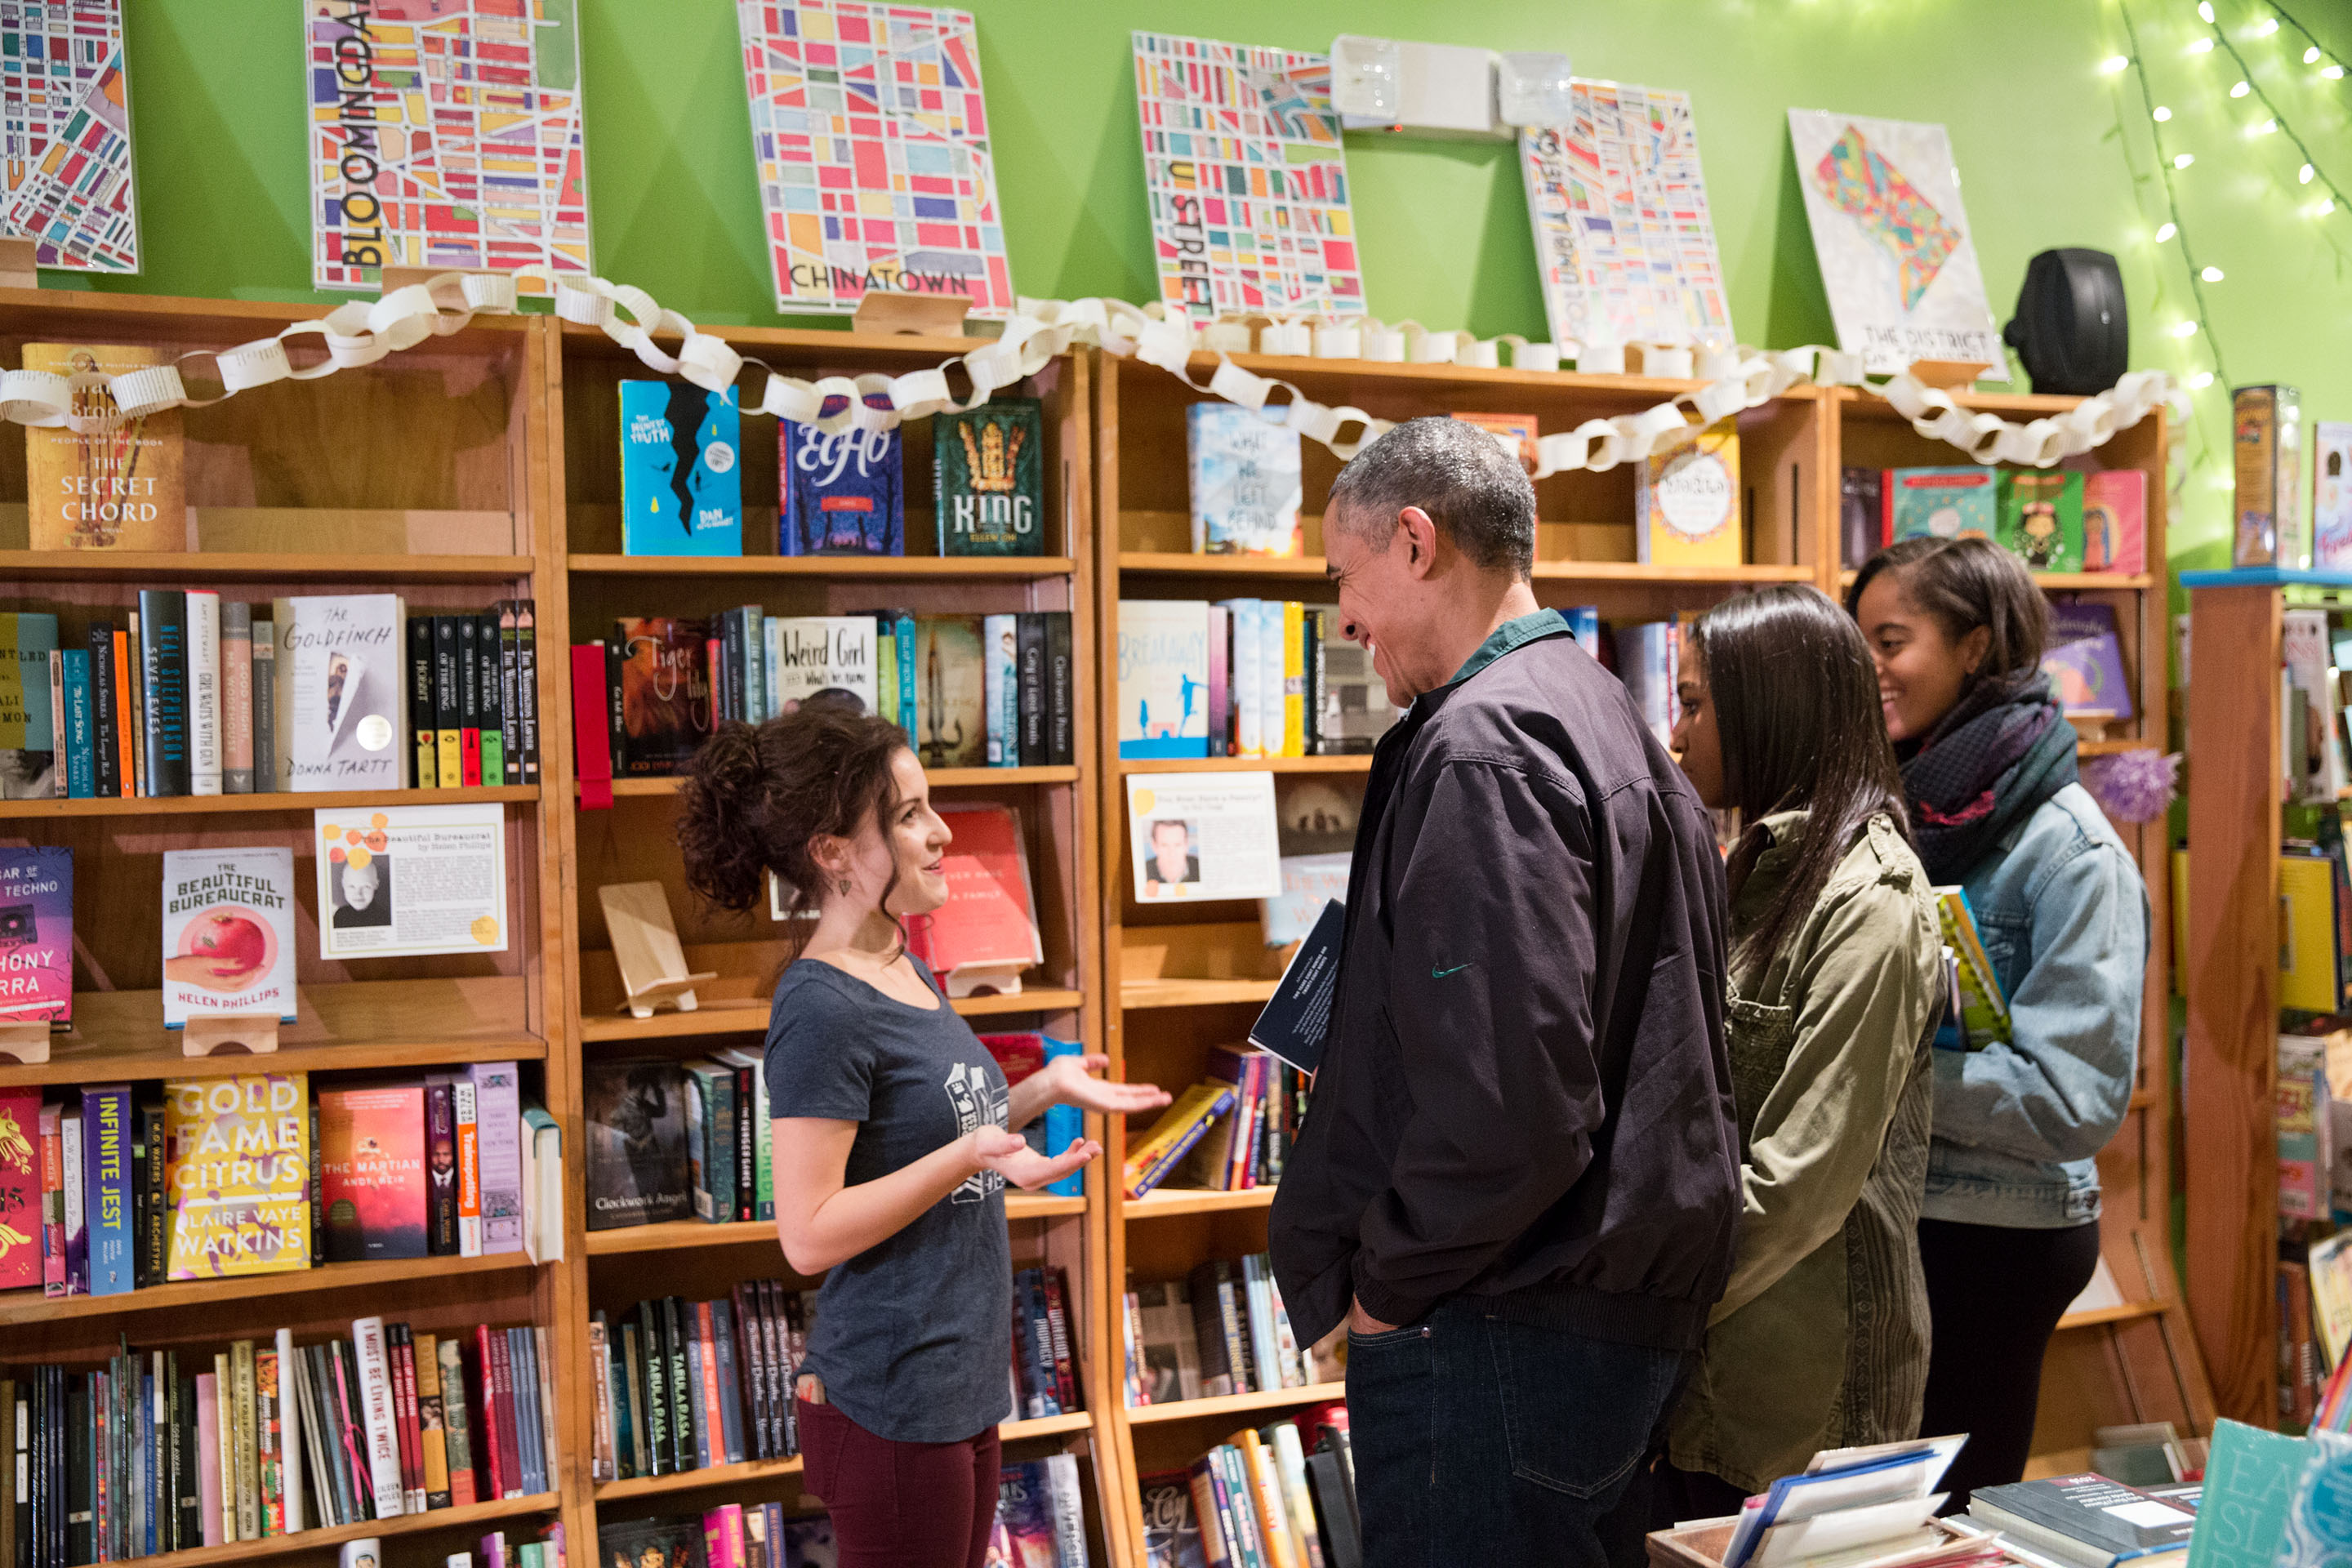 President Barack Obama, with daughters Malia and Sasha, shop for books at Upshur Street Books in Washington, D.C., on Small Business Saturday, Nov. 28, 2015.  (Official White House Photo by Pete Souza)